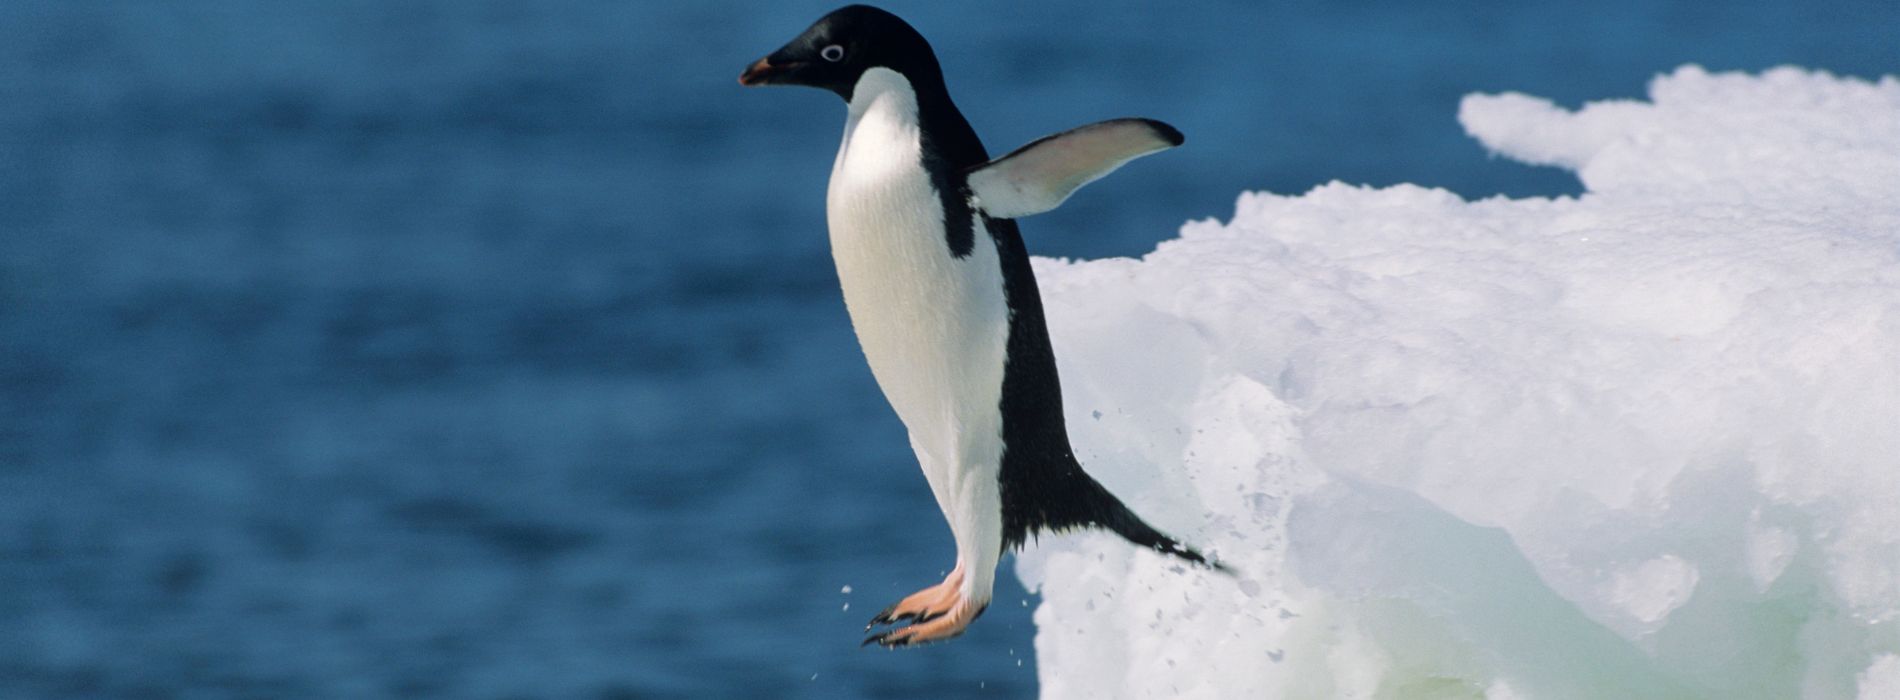 How High Can a Penguin Jump? Exploring the Jumping Abilities of Penguins